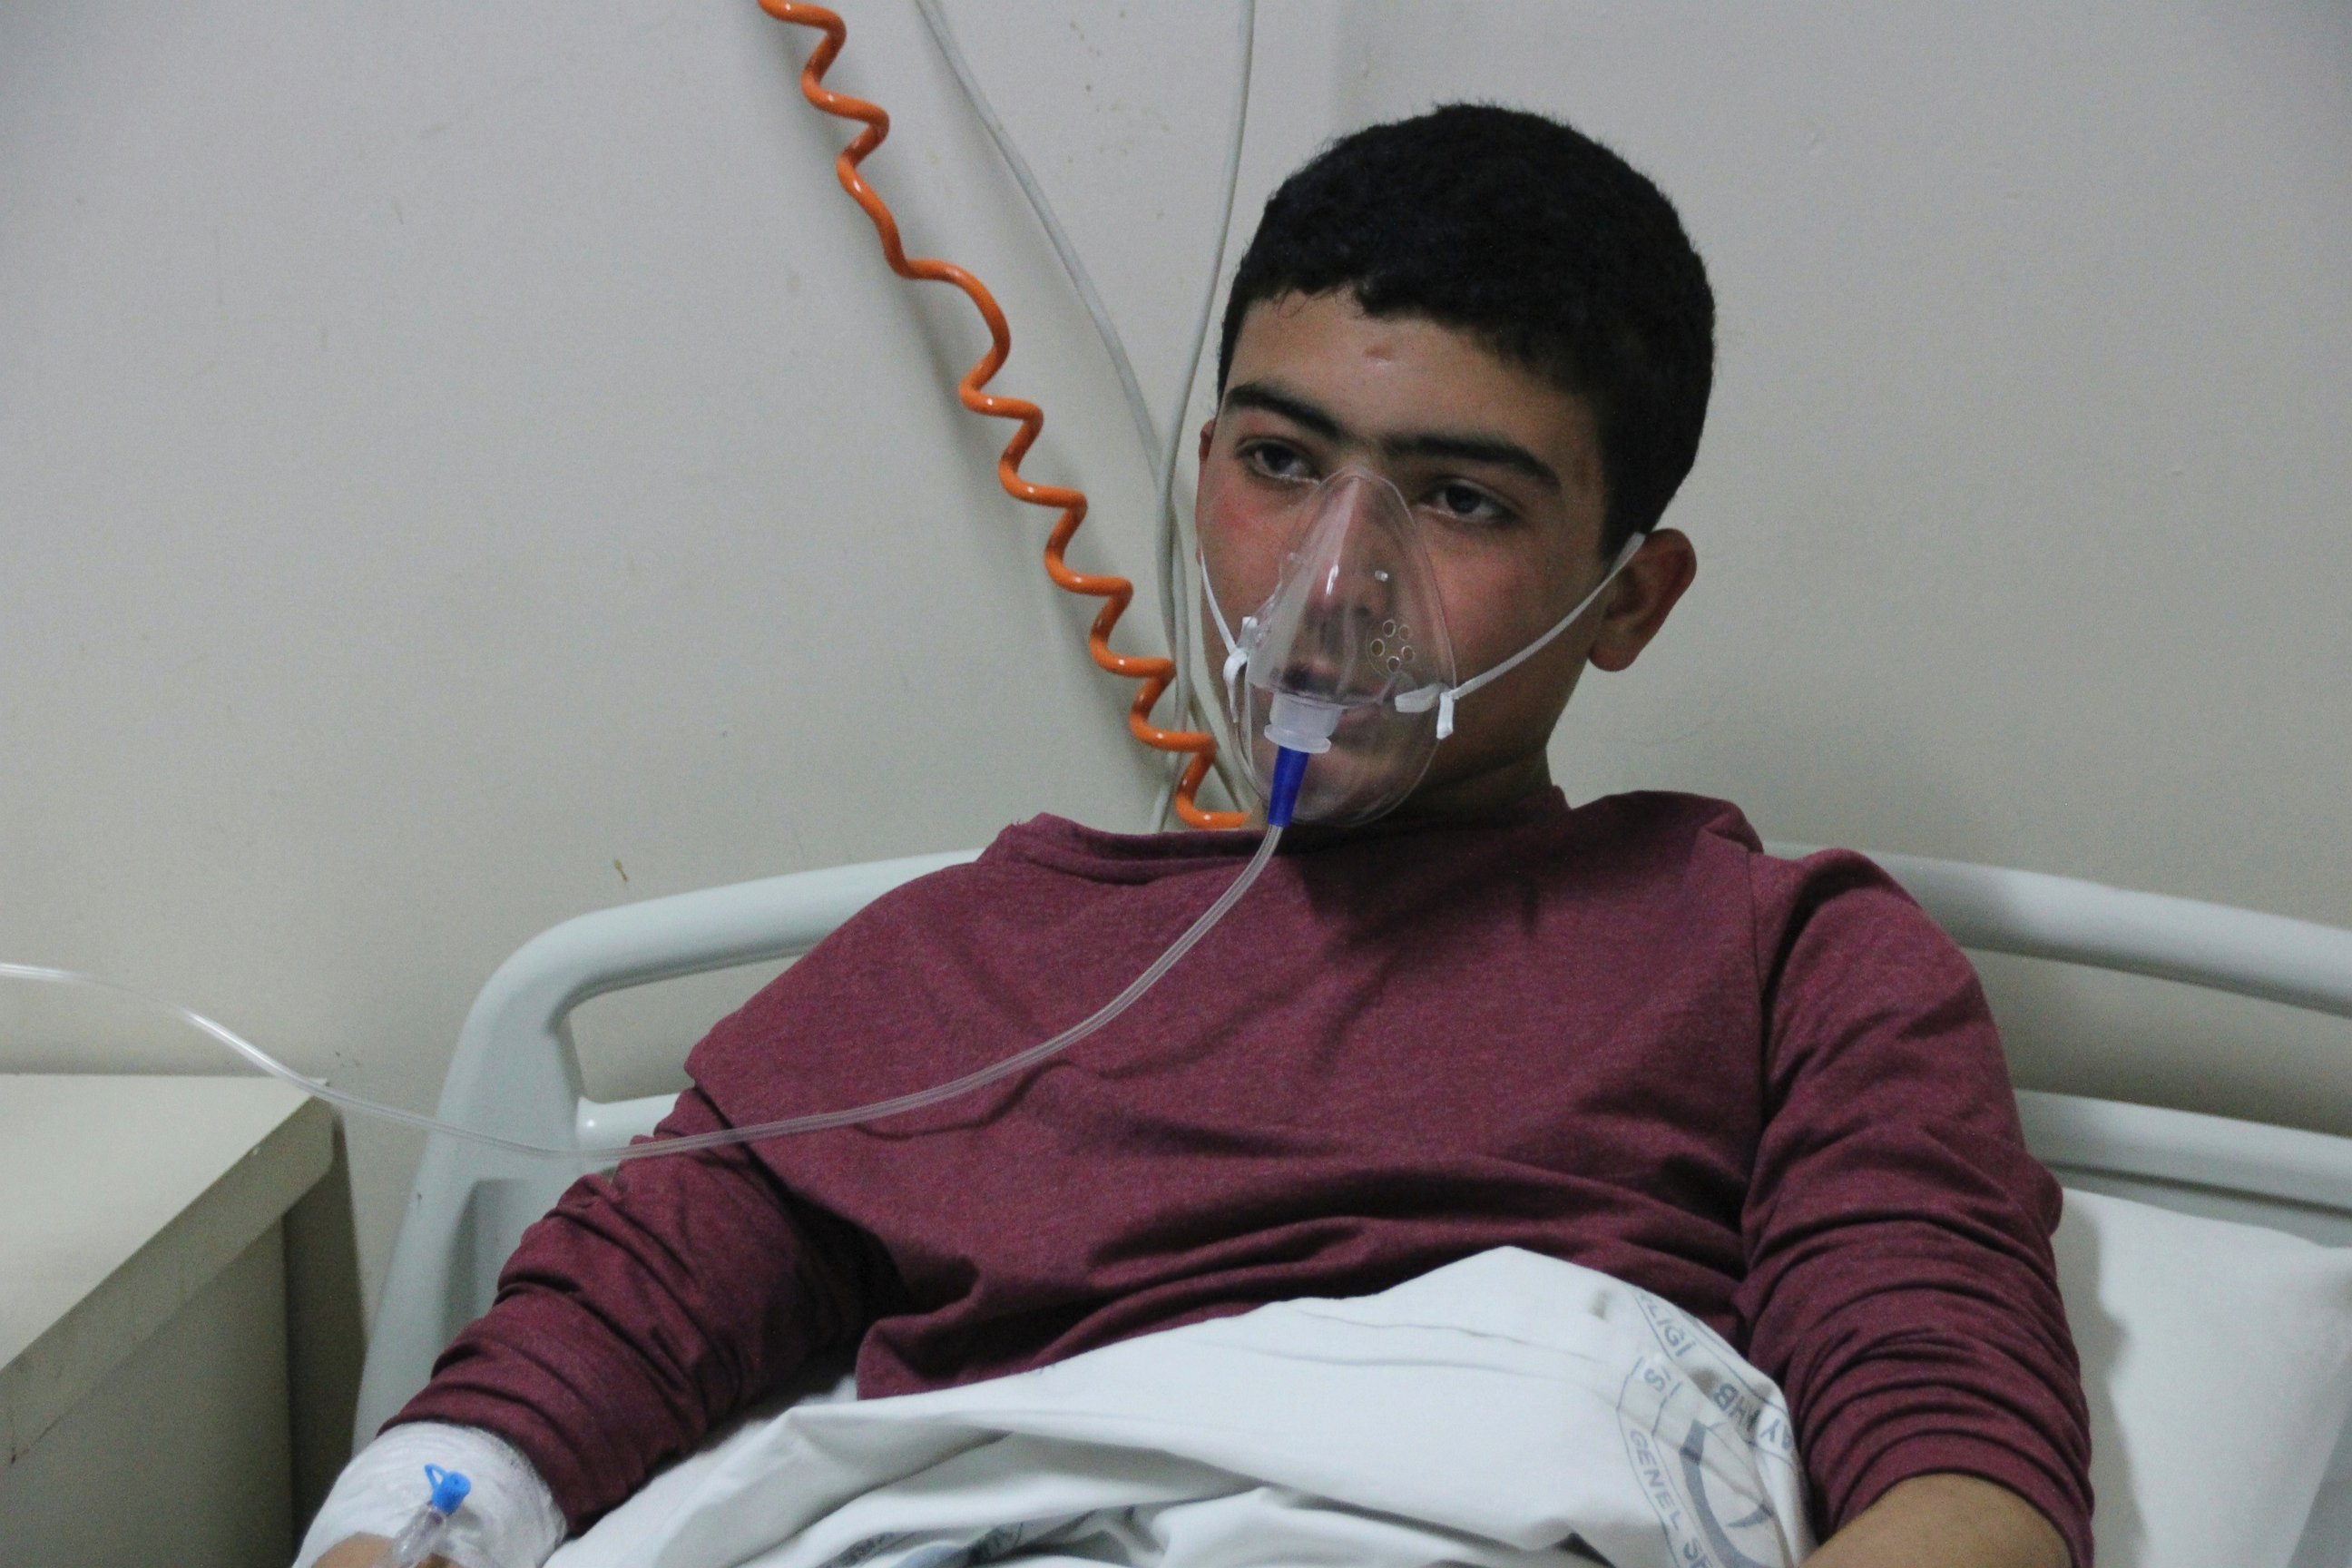 PHOTO: A victim of the alleged chemical weapons attacks in Syrian city of Idlib, is seen at a local hospital in Reyhanli, Turkey.